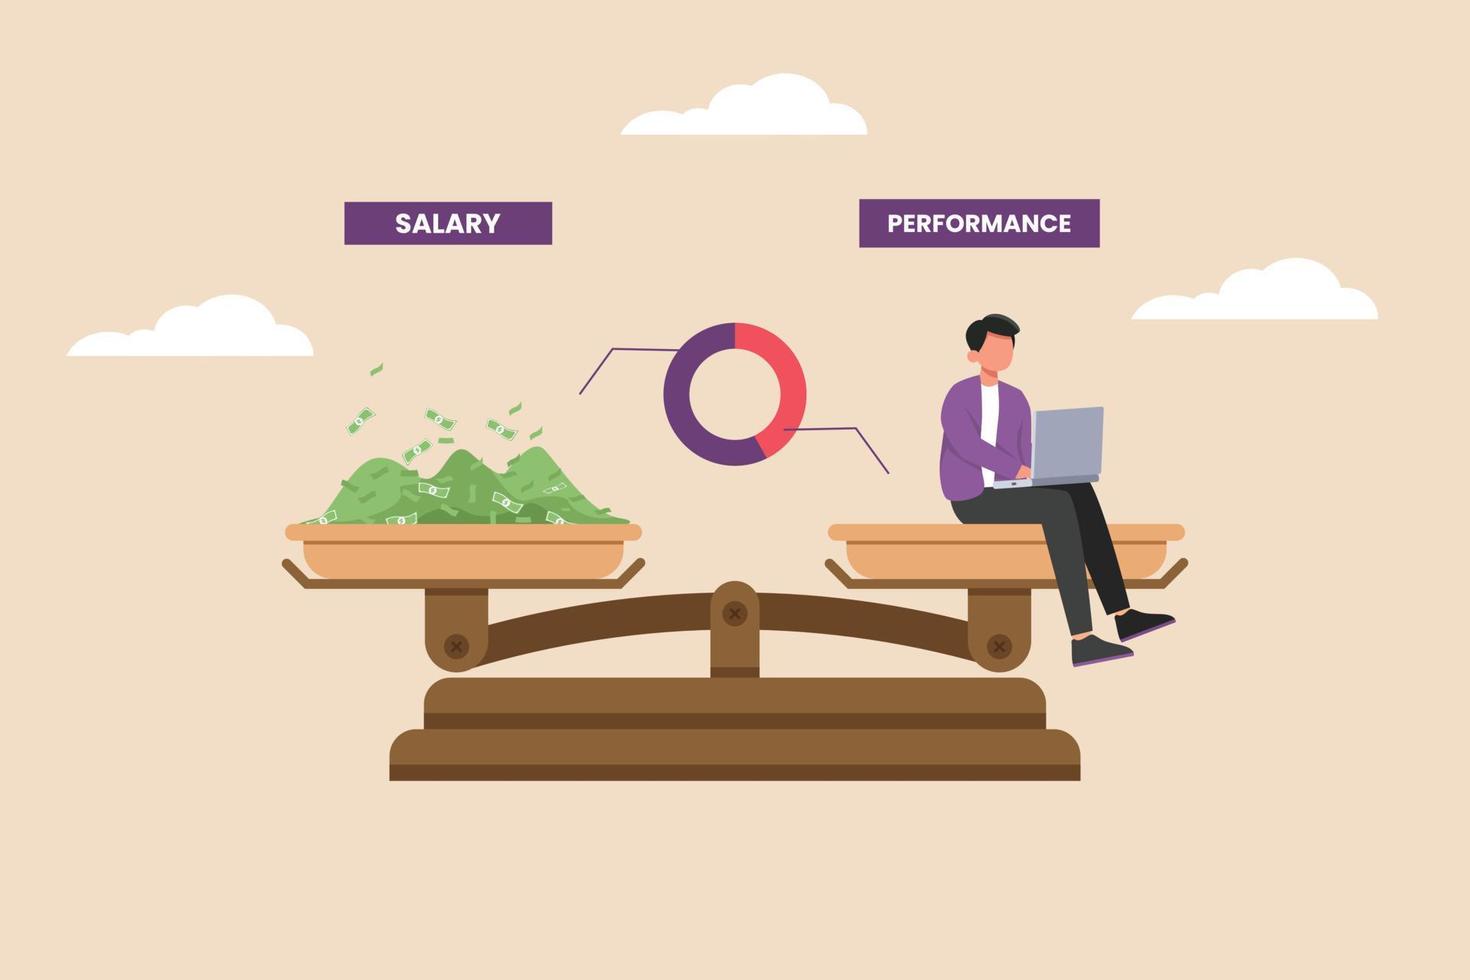 Employee performance must be balanced with the salary his receive. Human resources concept. Colored flat graphic vector illustration isolated.